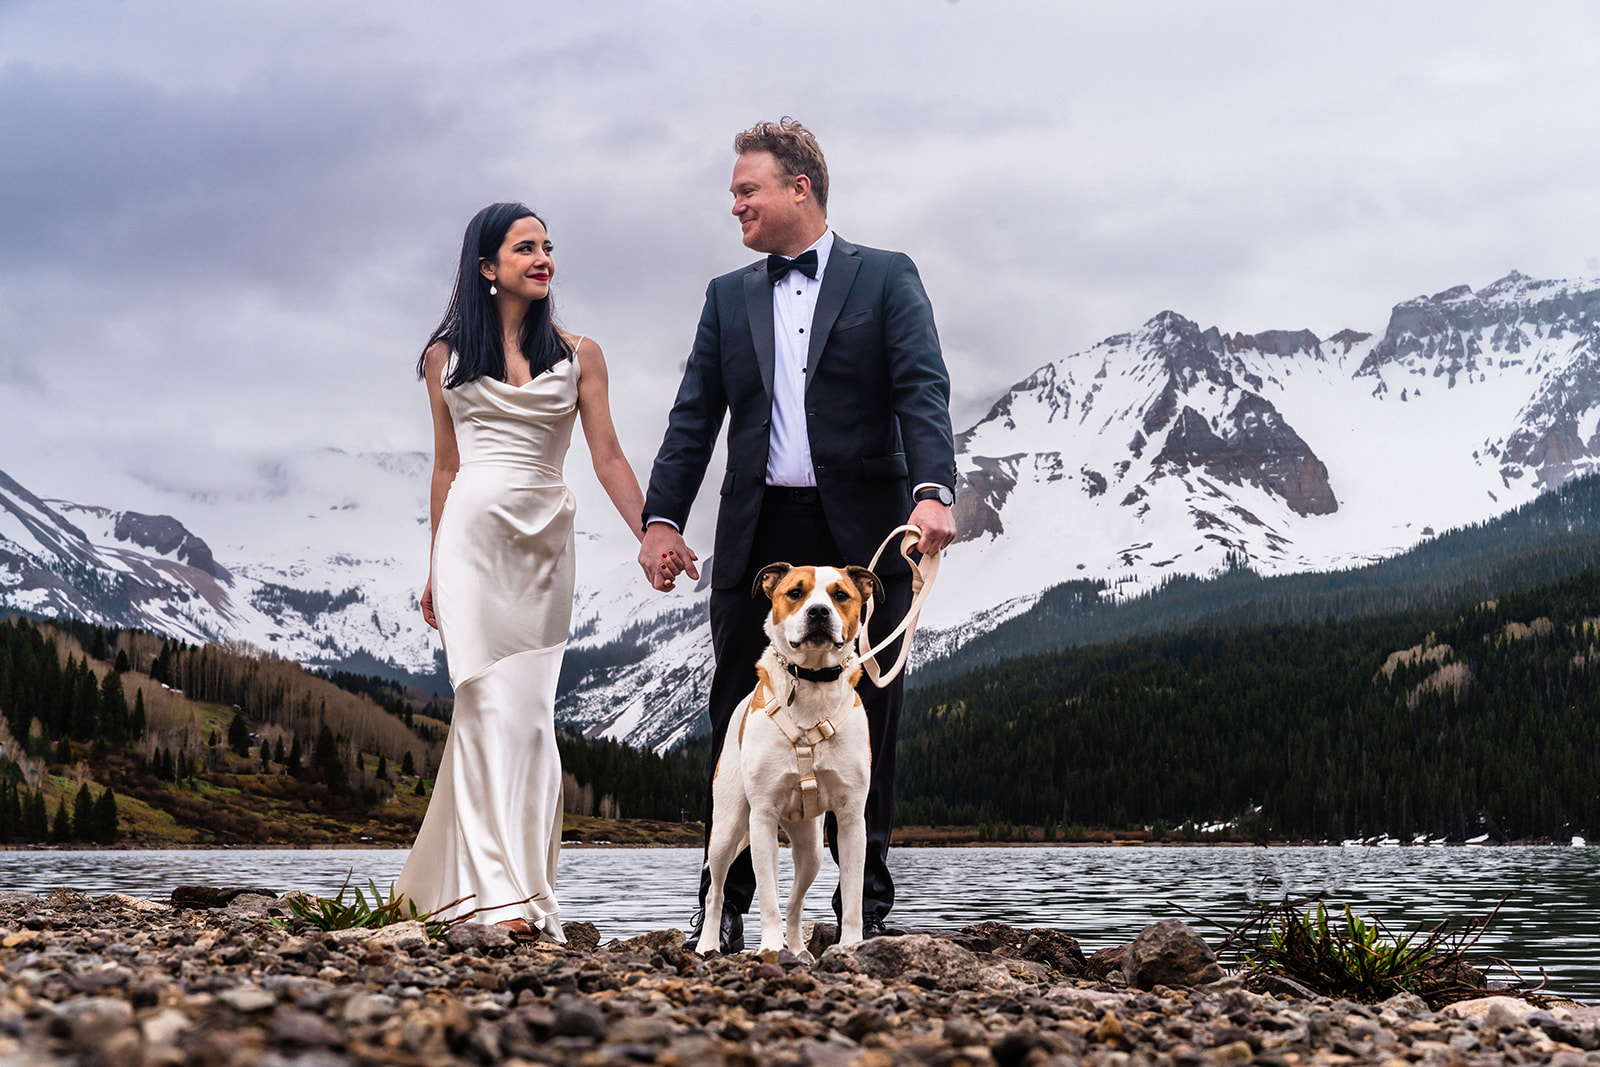 A bride and groom standing next to a lake with mountains in the background.